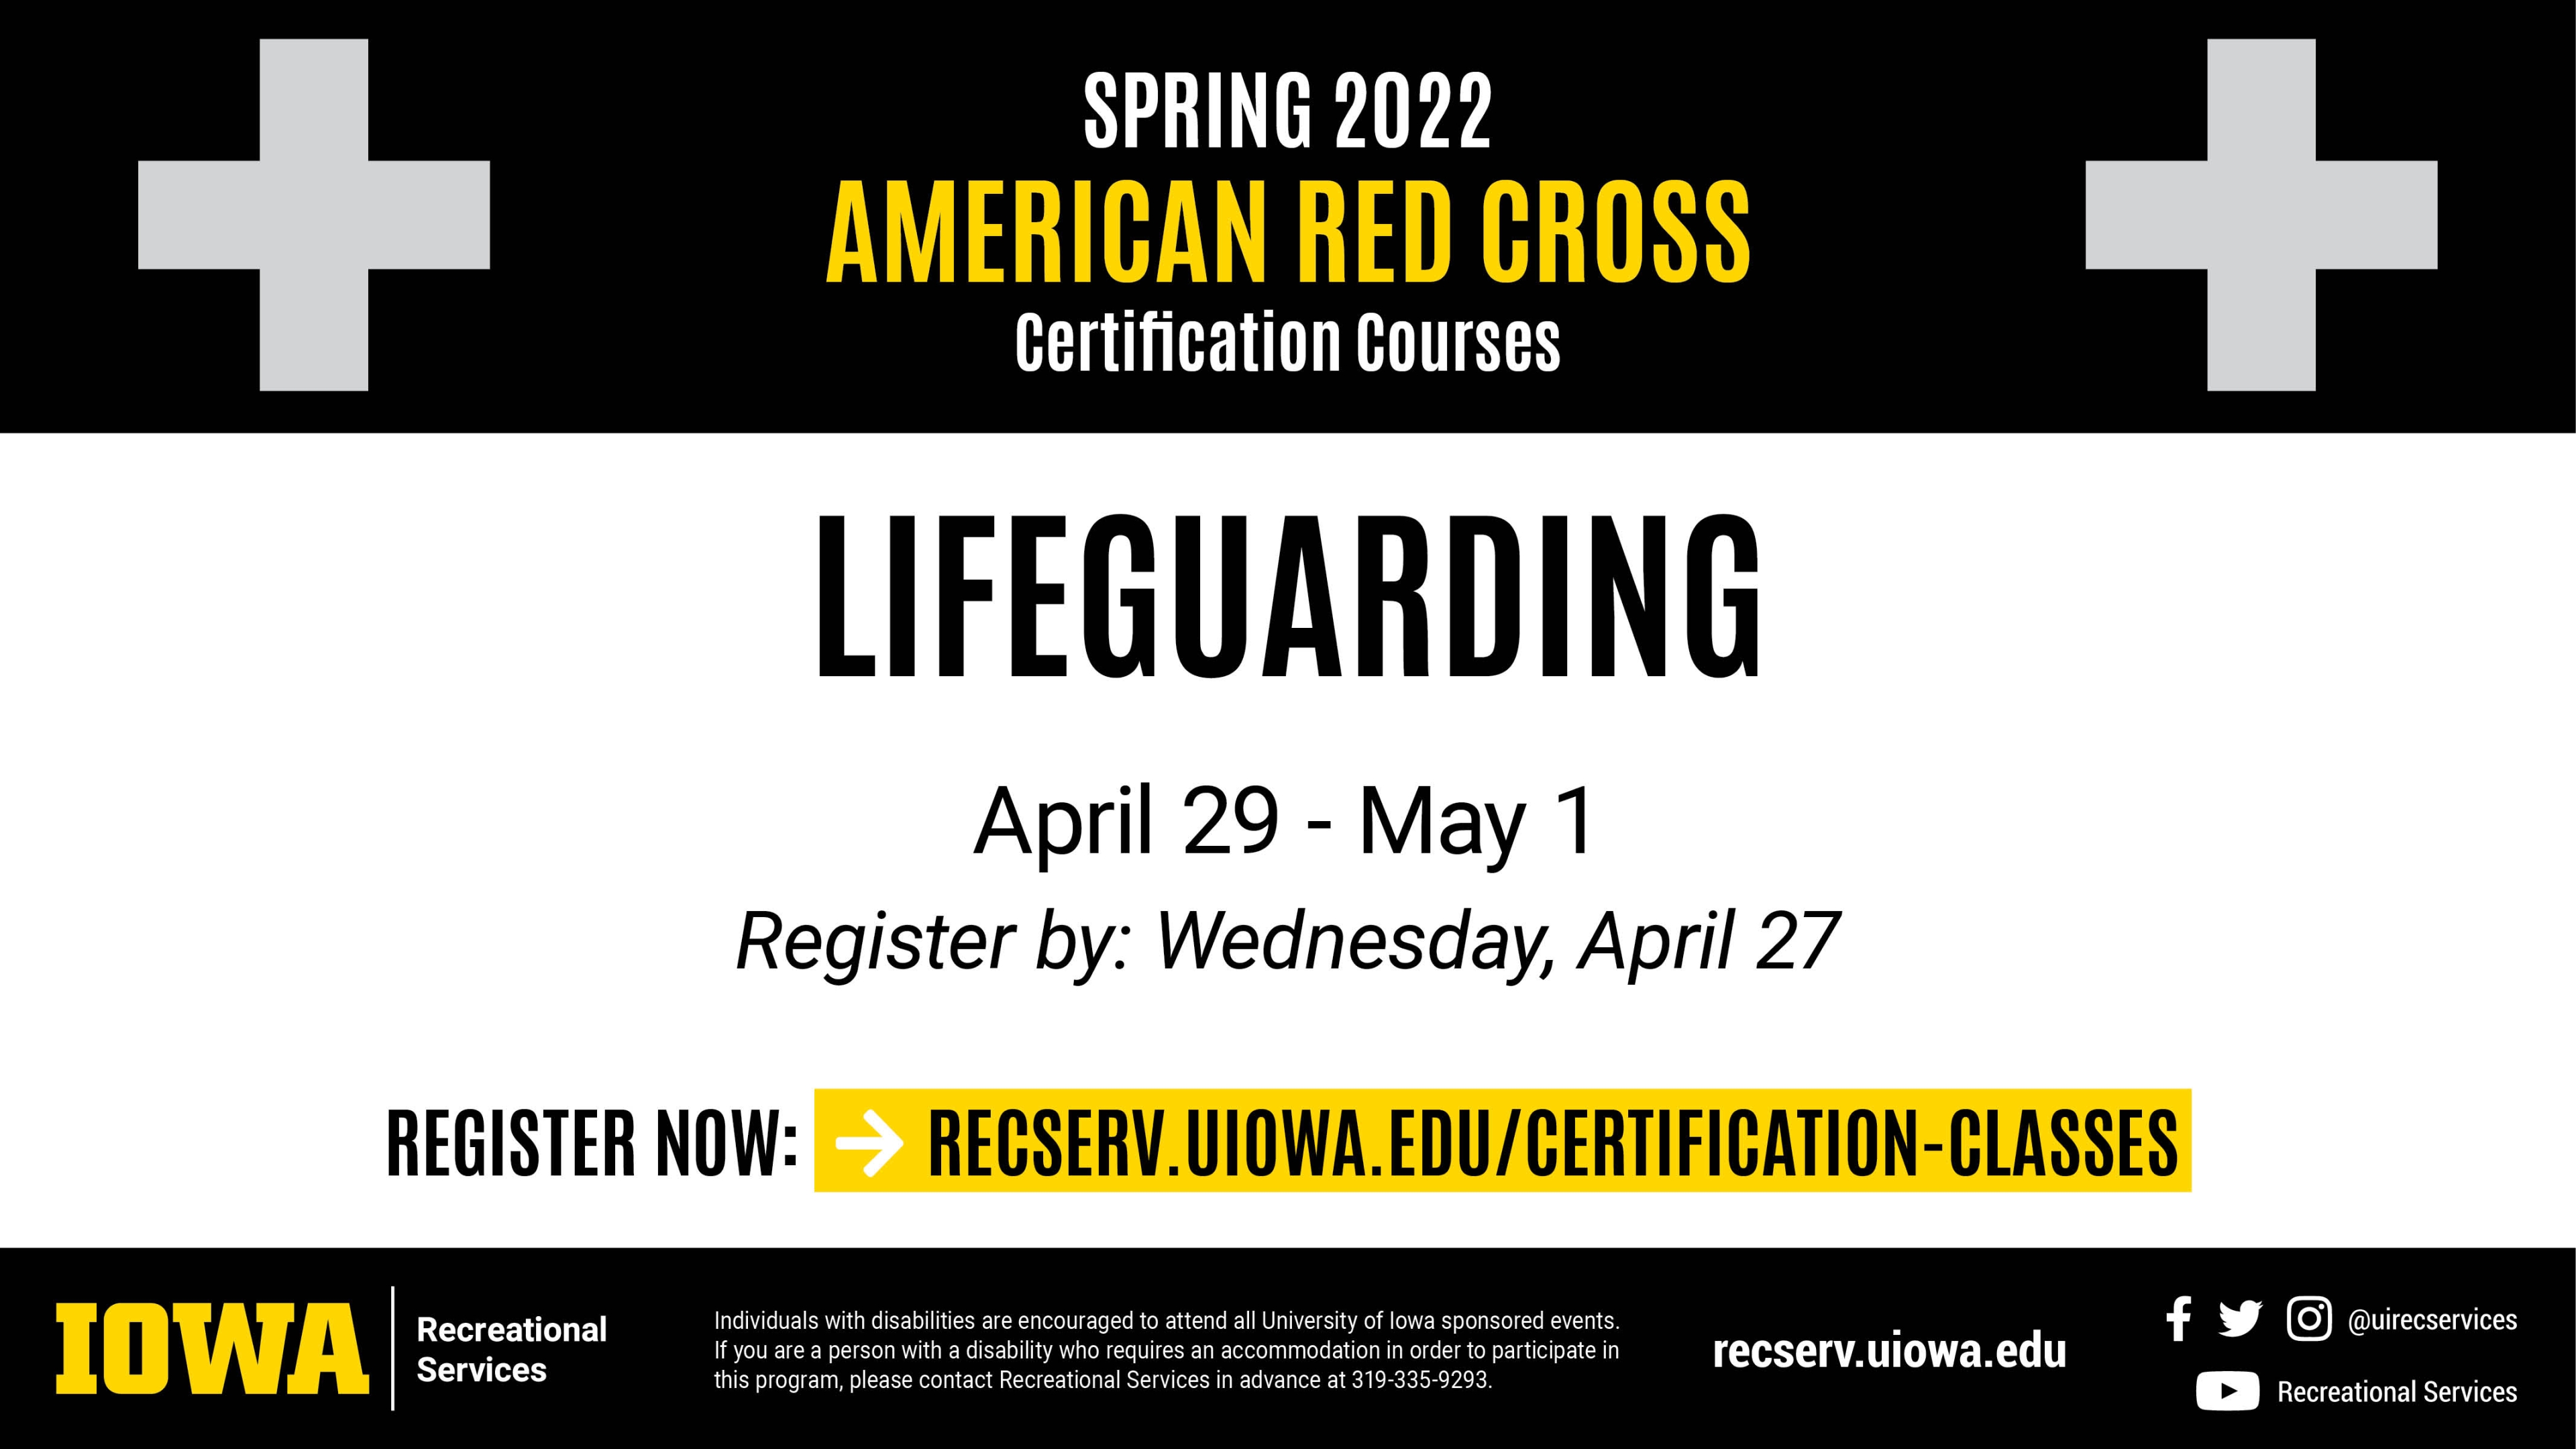 Spring 2022 American Red Cross Certification Courses Lifeguarding April 29 - May 1 Register by: Wednesday, April 27. Register now: recserv.uiowa.edu/certification-classes